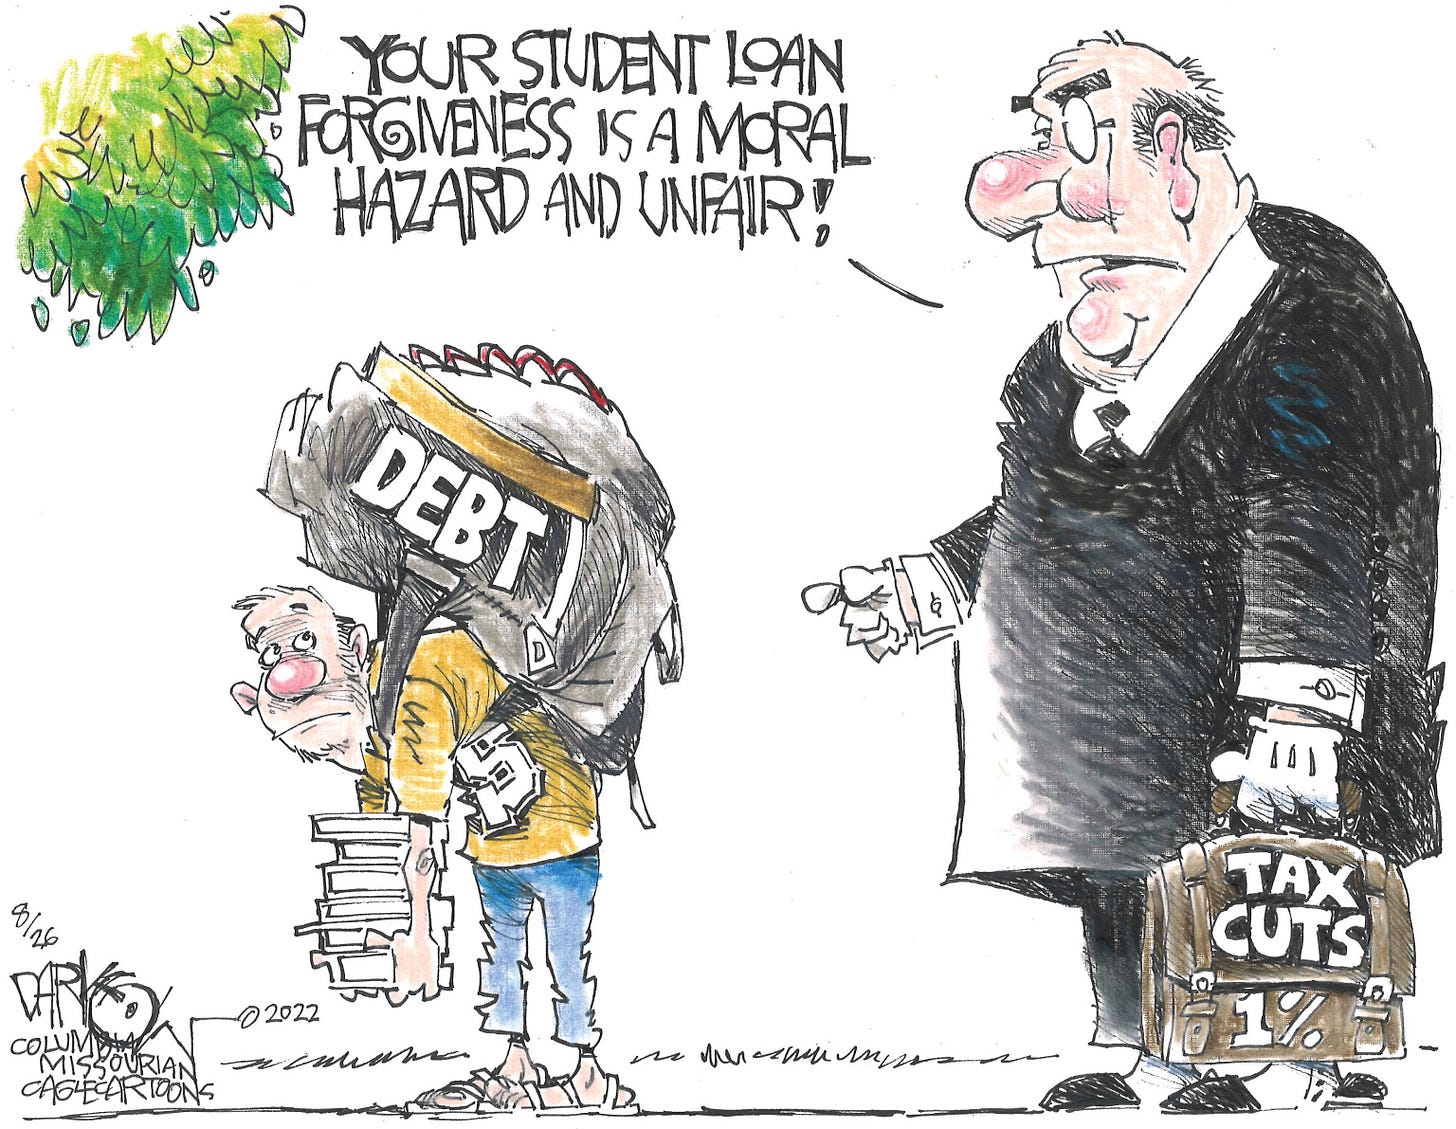 Republicans hate student loan programs that help the middle class.